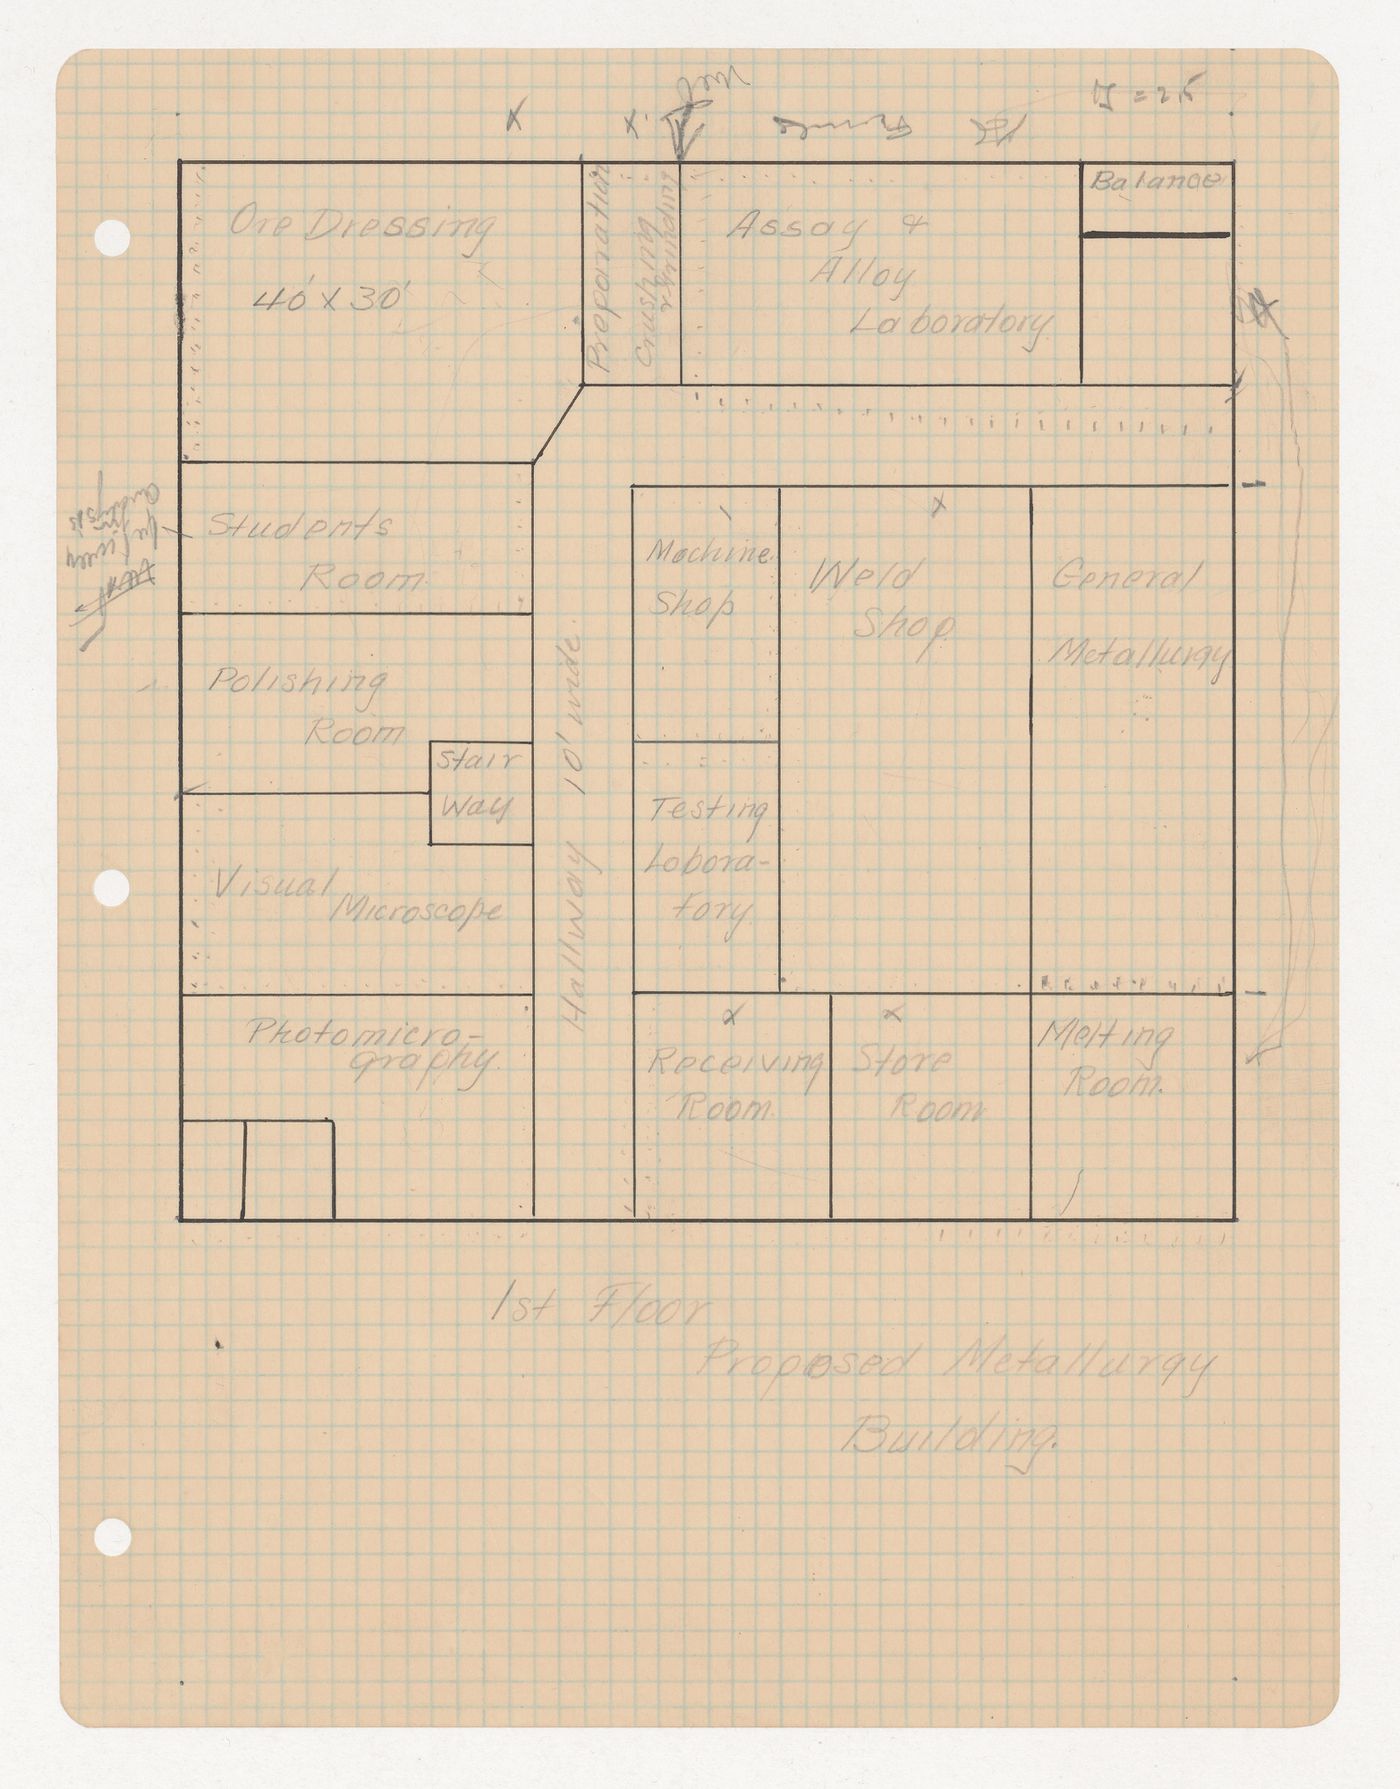 First floor plan for the Metallurgy Building, Illinois Institute of Technology, Chicago